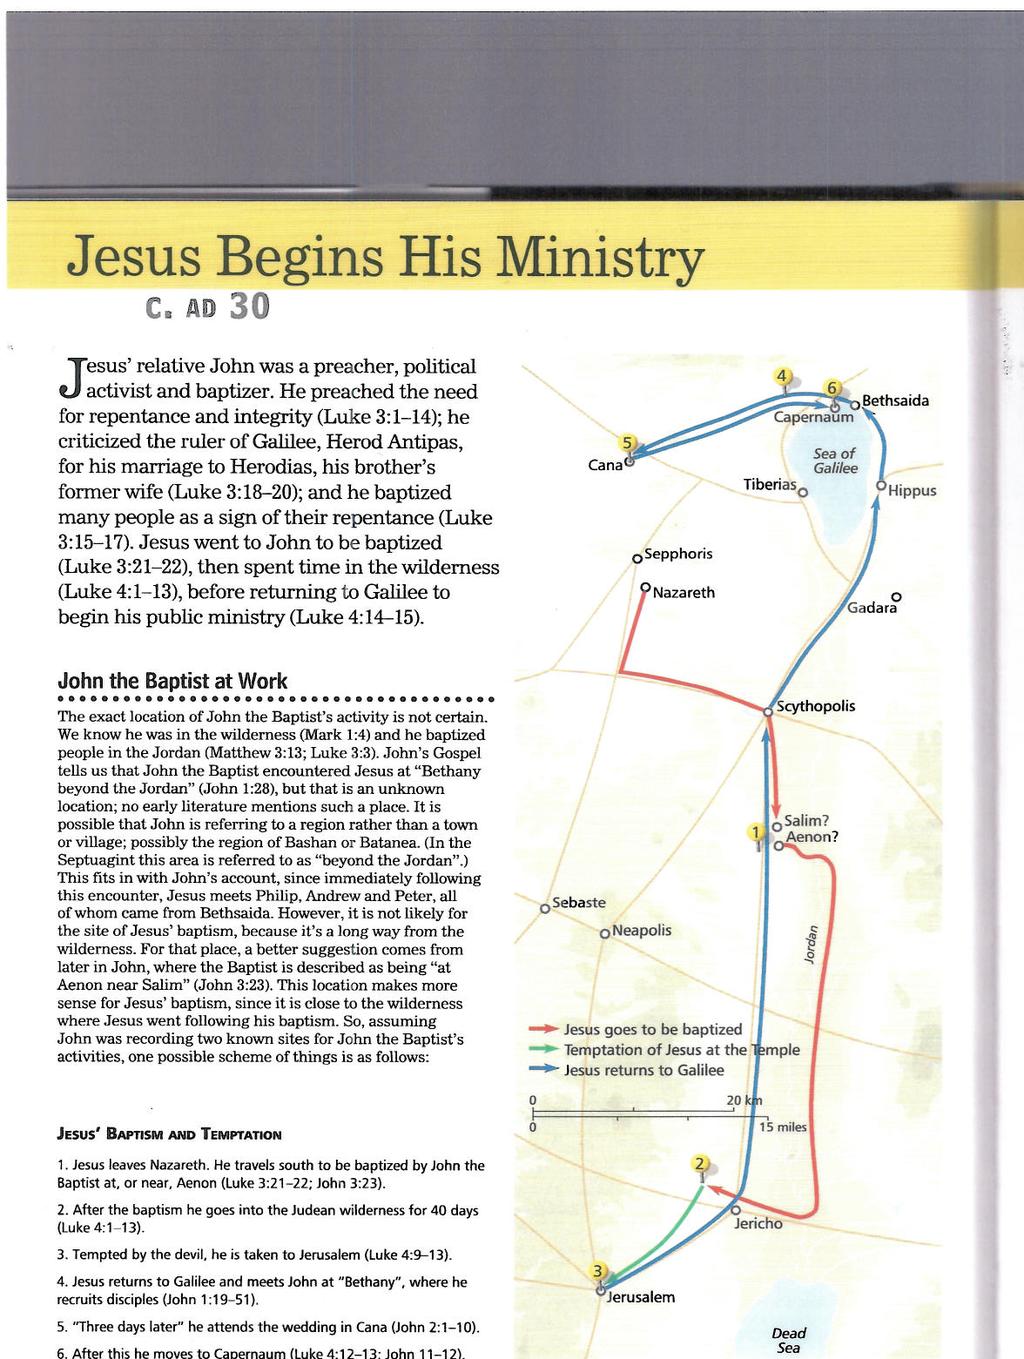 Maps on Christ's Life: The following six pages show the journeys that Christ took around Galilee and Palestine at the start of His public ministry.